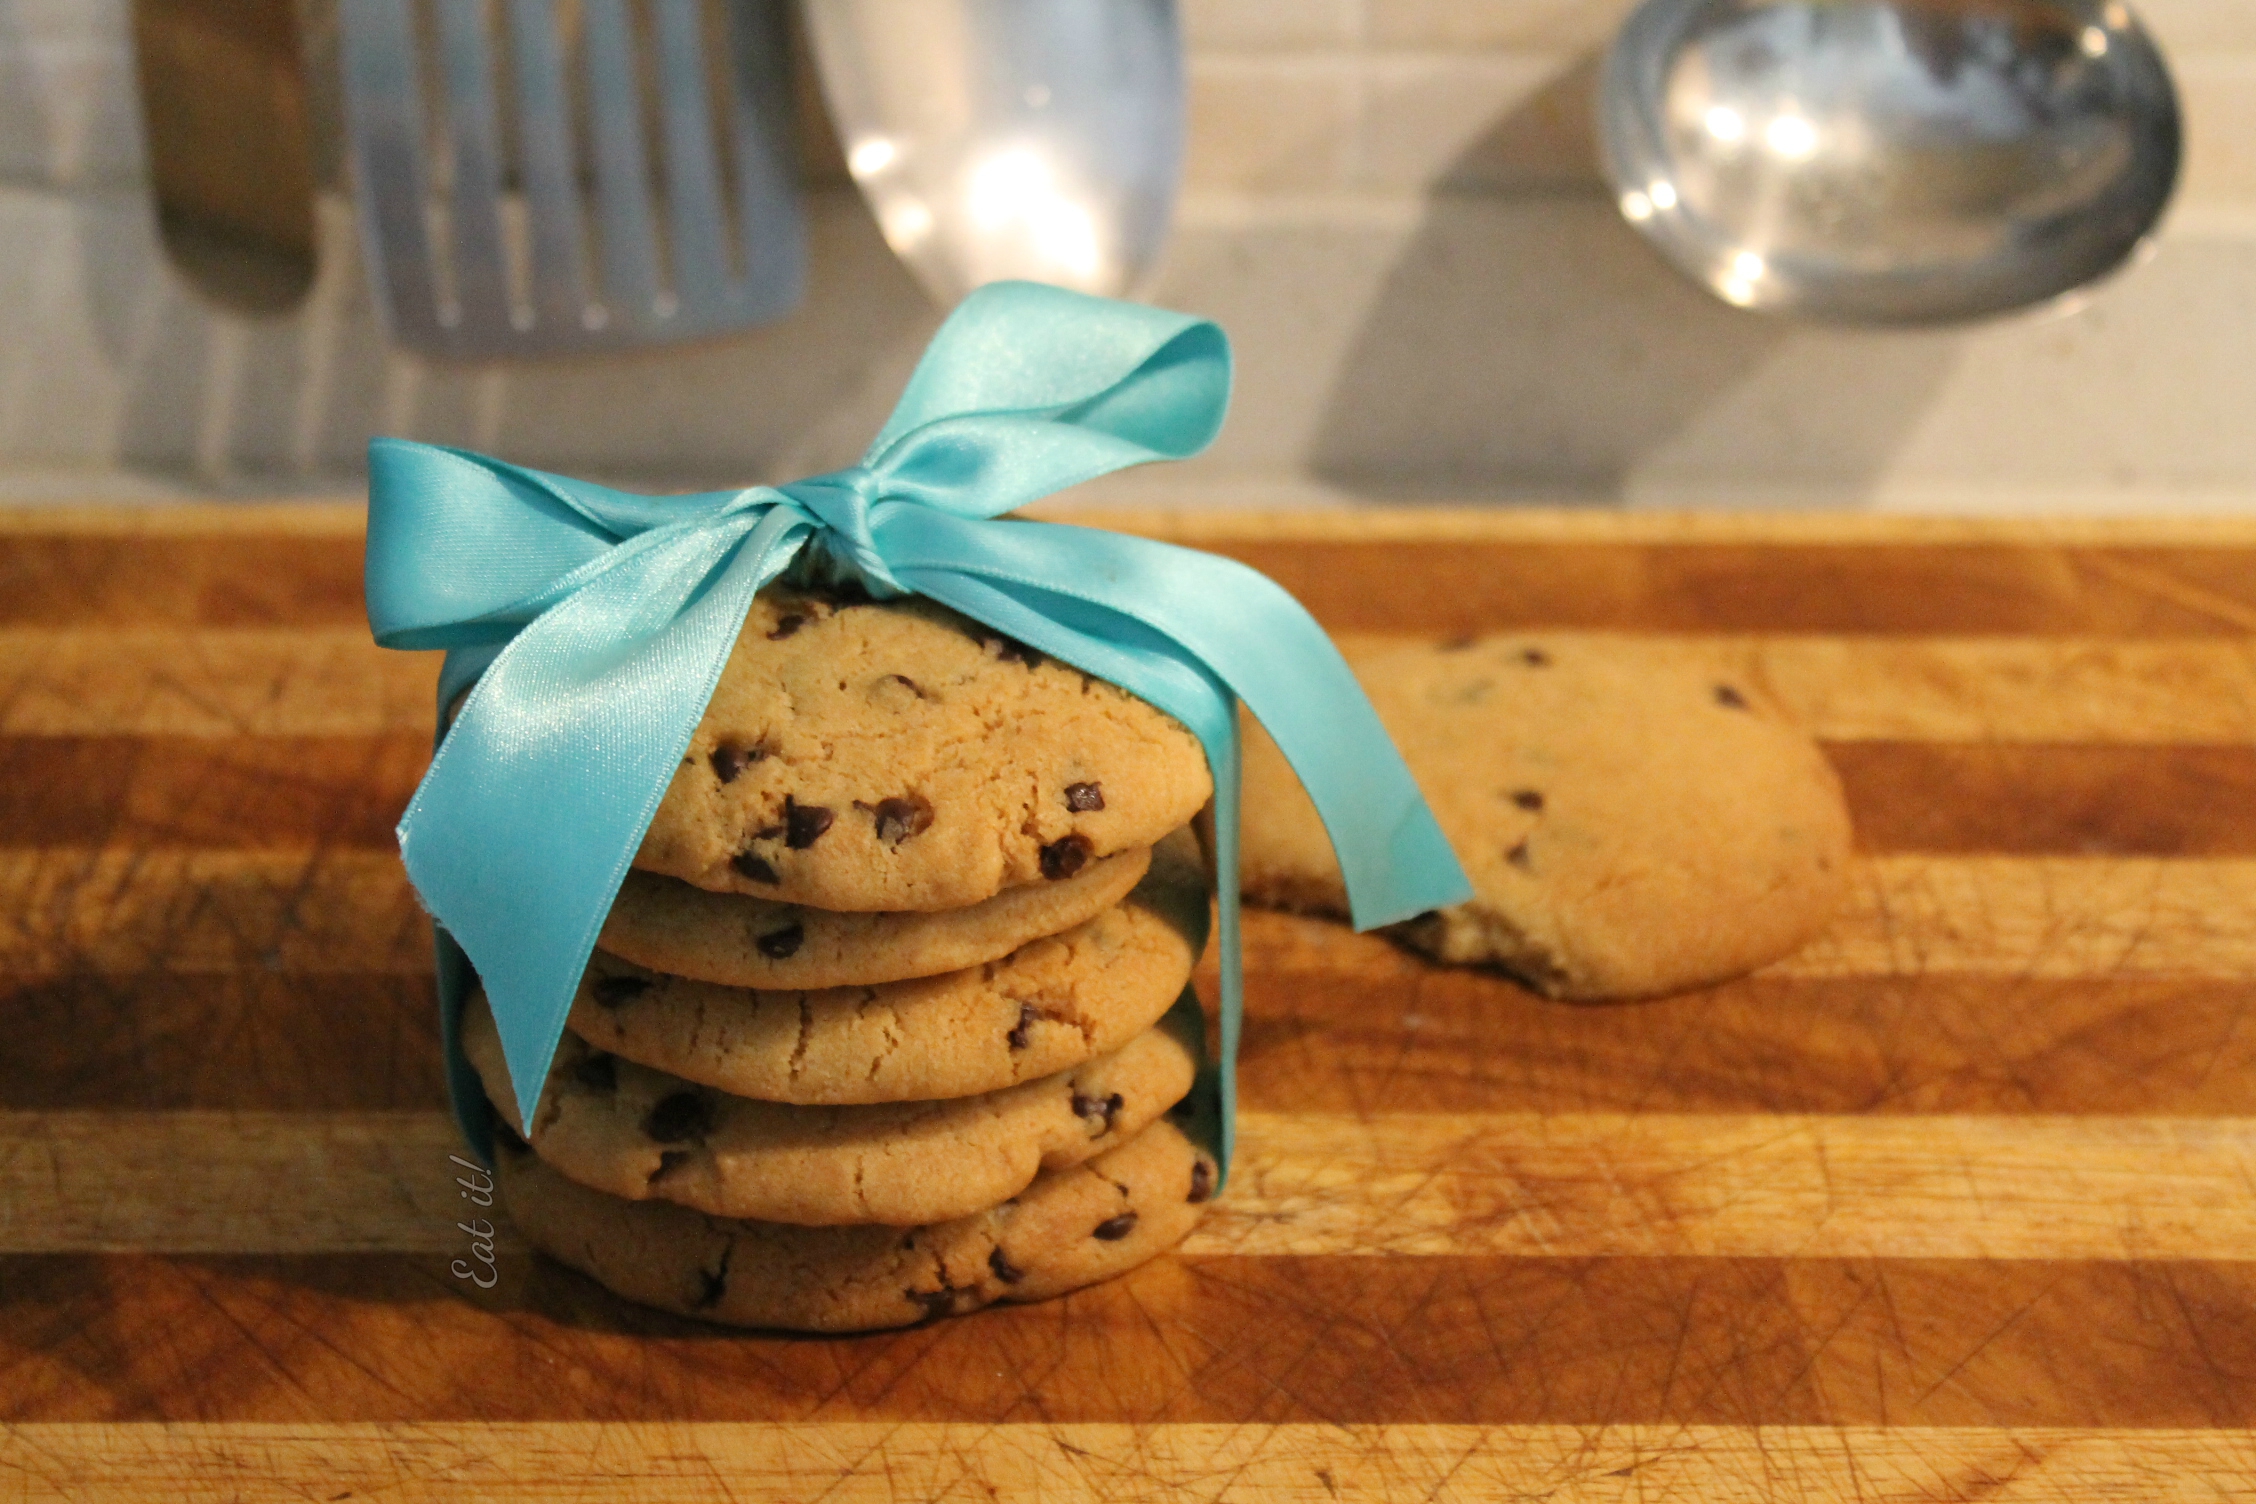  Peanut butter chocolate chip cookies